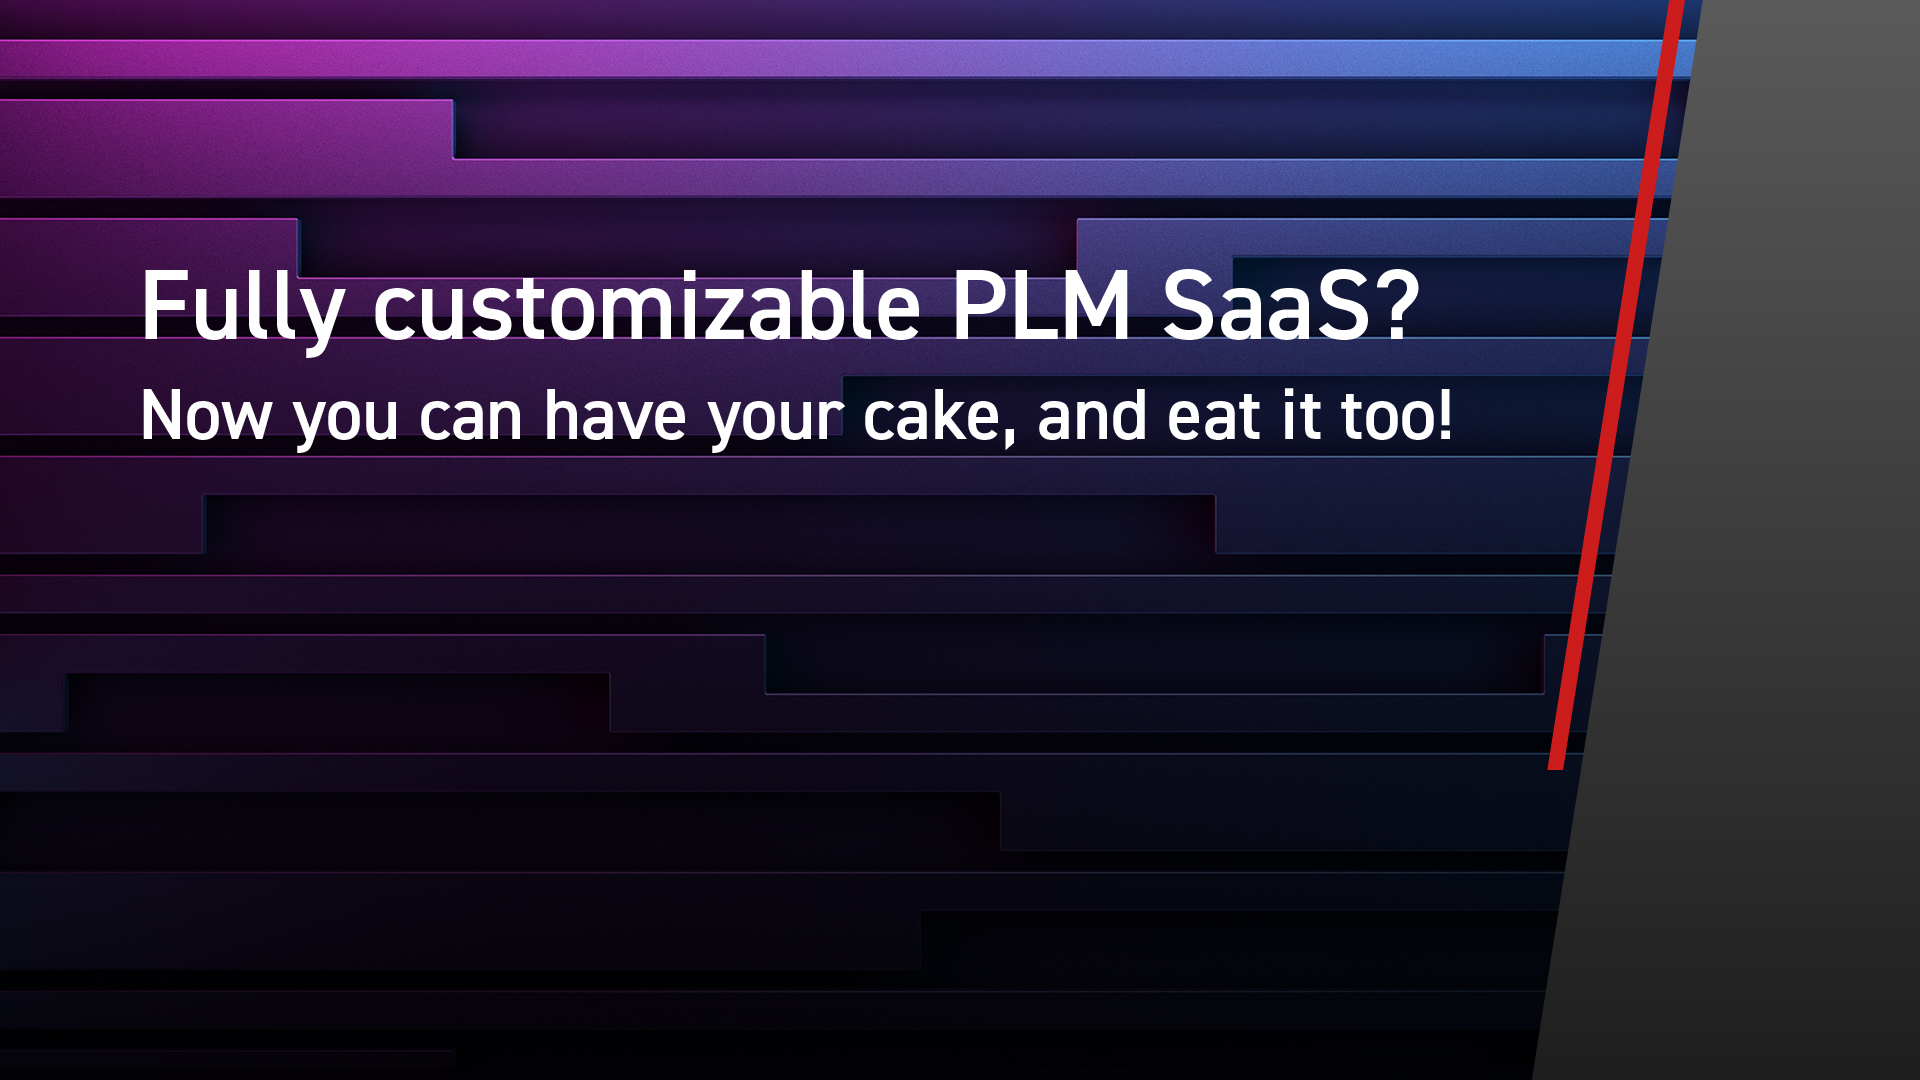 Fully customizable PLM Software as a Service?...“Yes, you CAN now have your cake, and eat it too!”